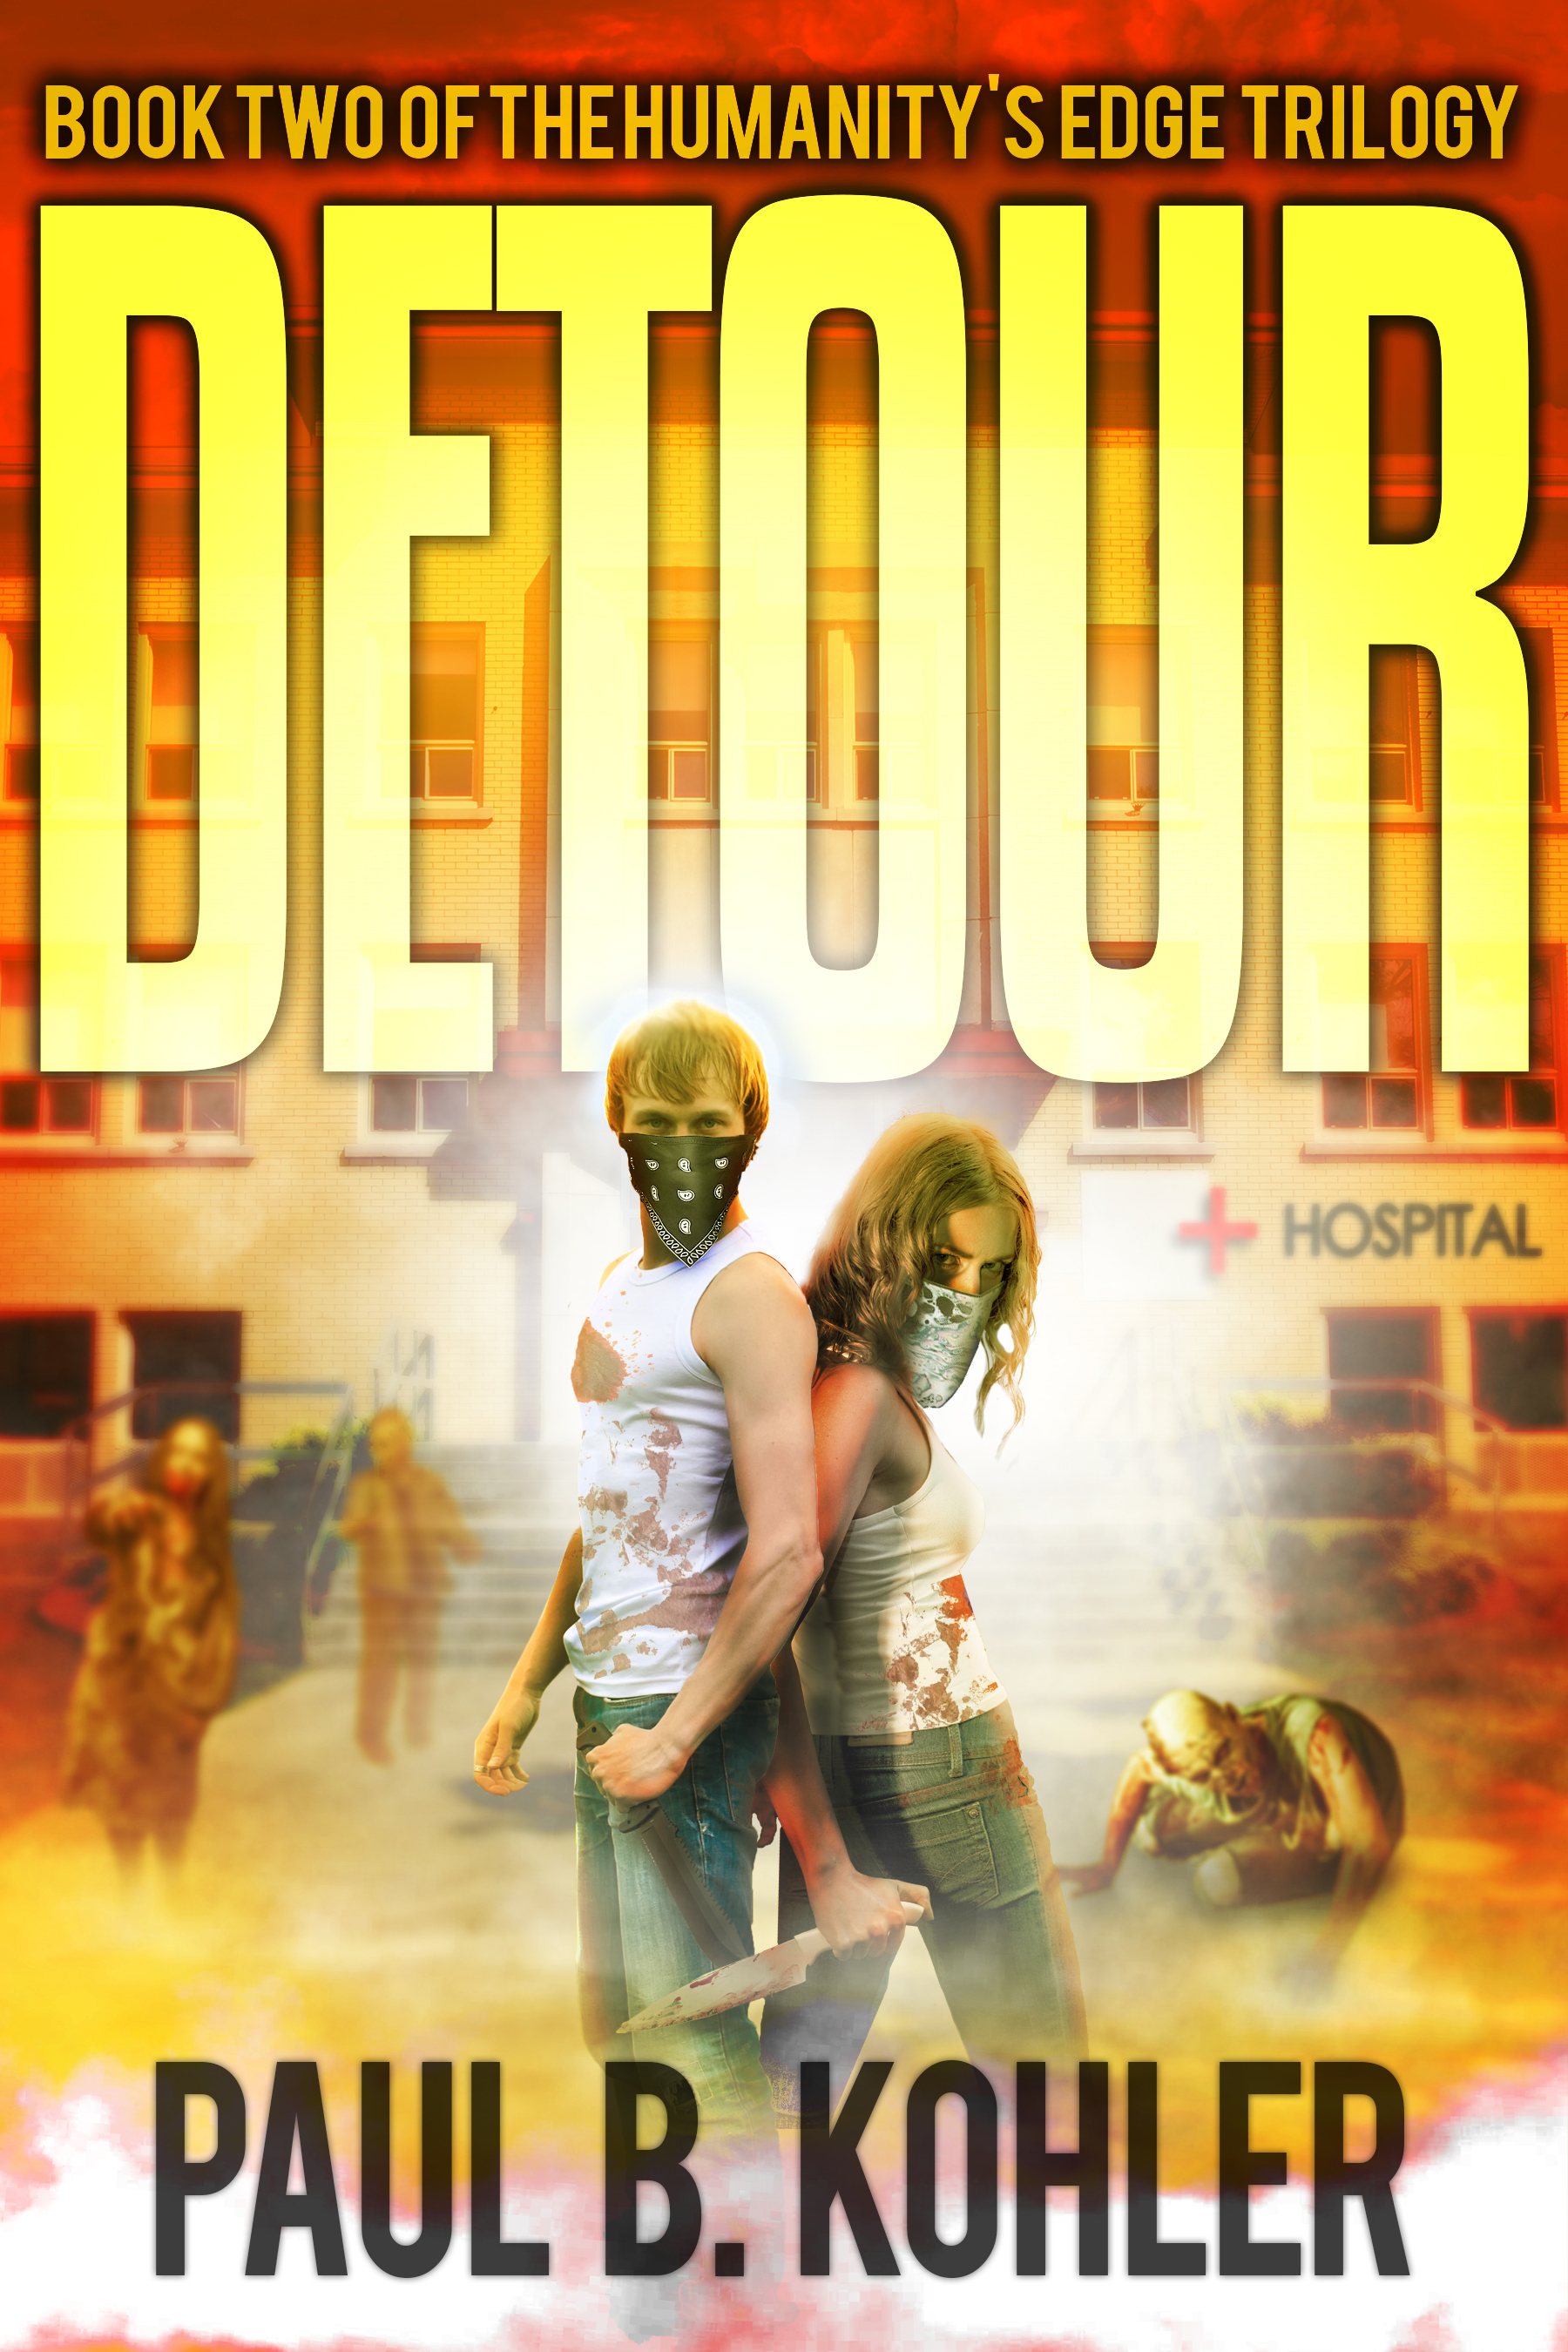 Detour, Clay Dobbs, Zombies, genetic engineering, humanity's edge, sci-fi book